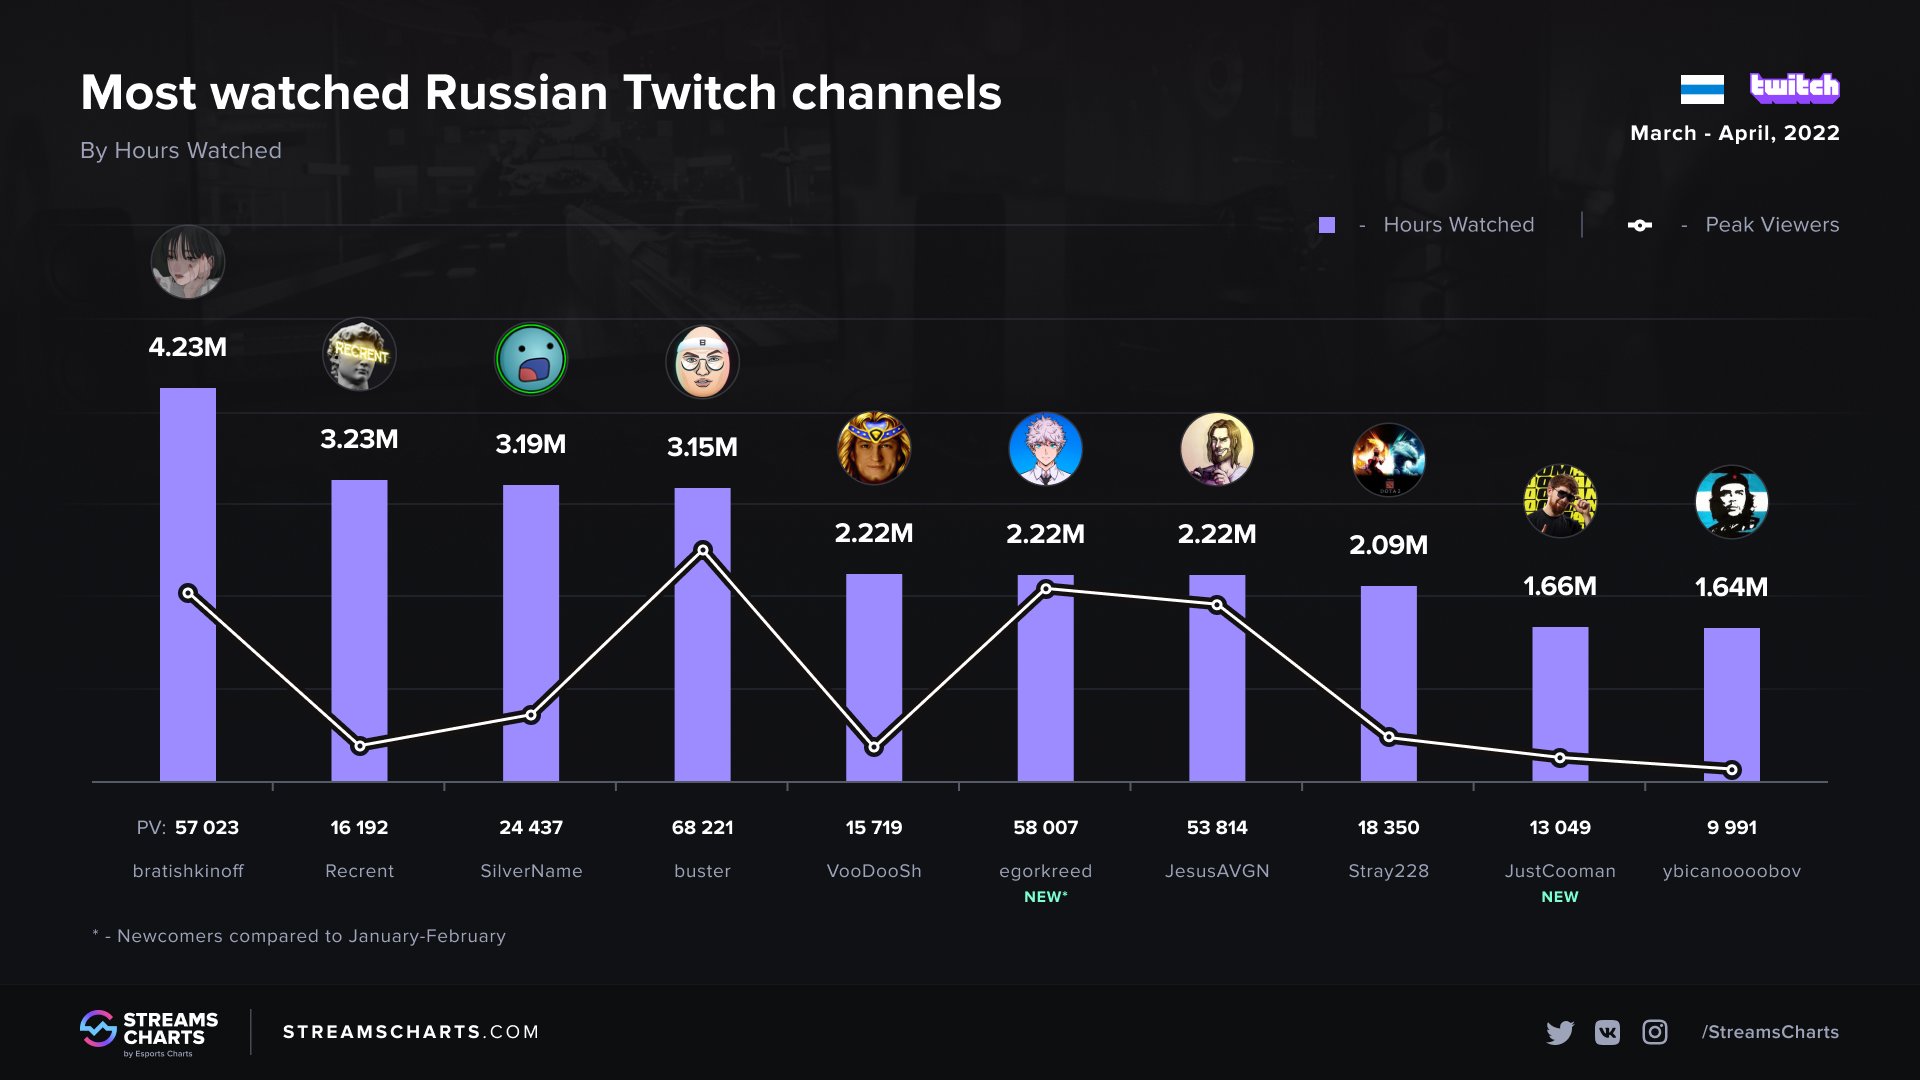 chess24 - Stream Jan 27, 2021 - Stats on viewers, followers, subscribers;  VOD and clips · TwitchTracker